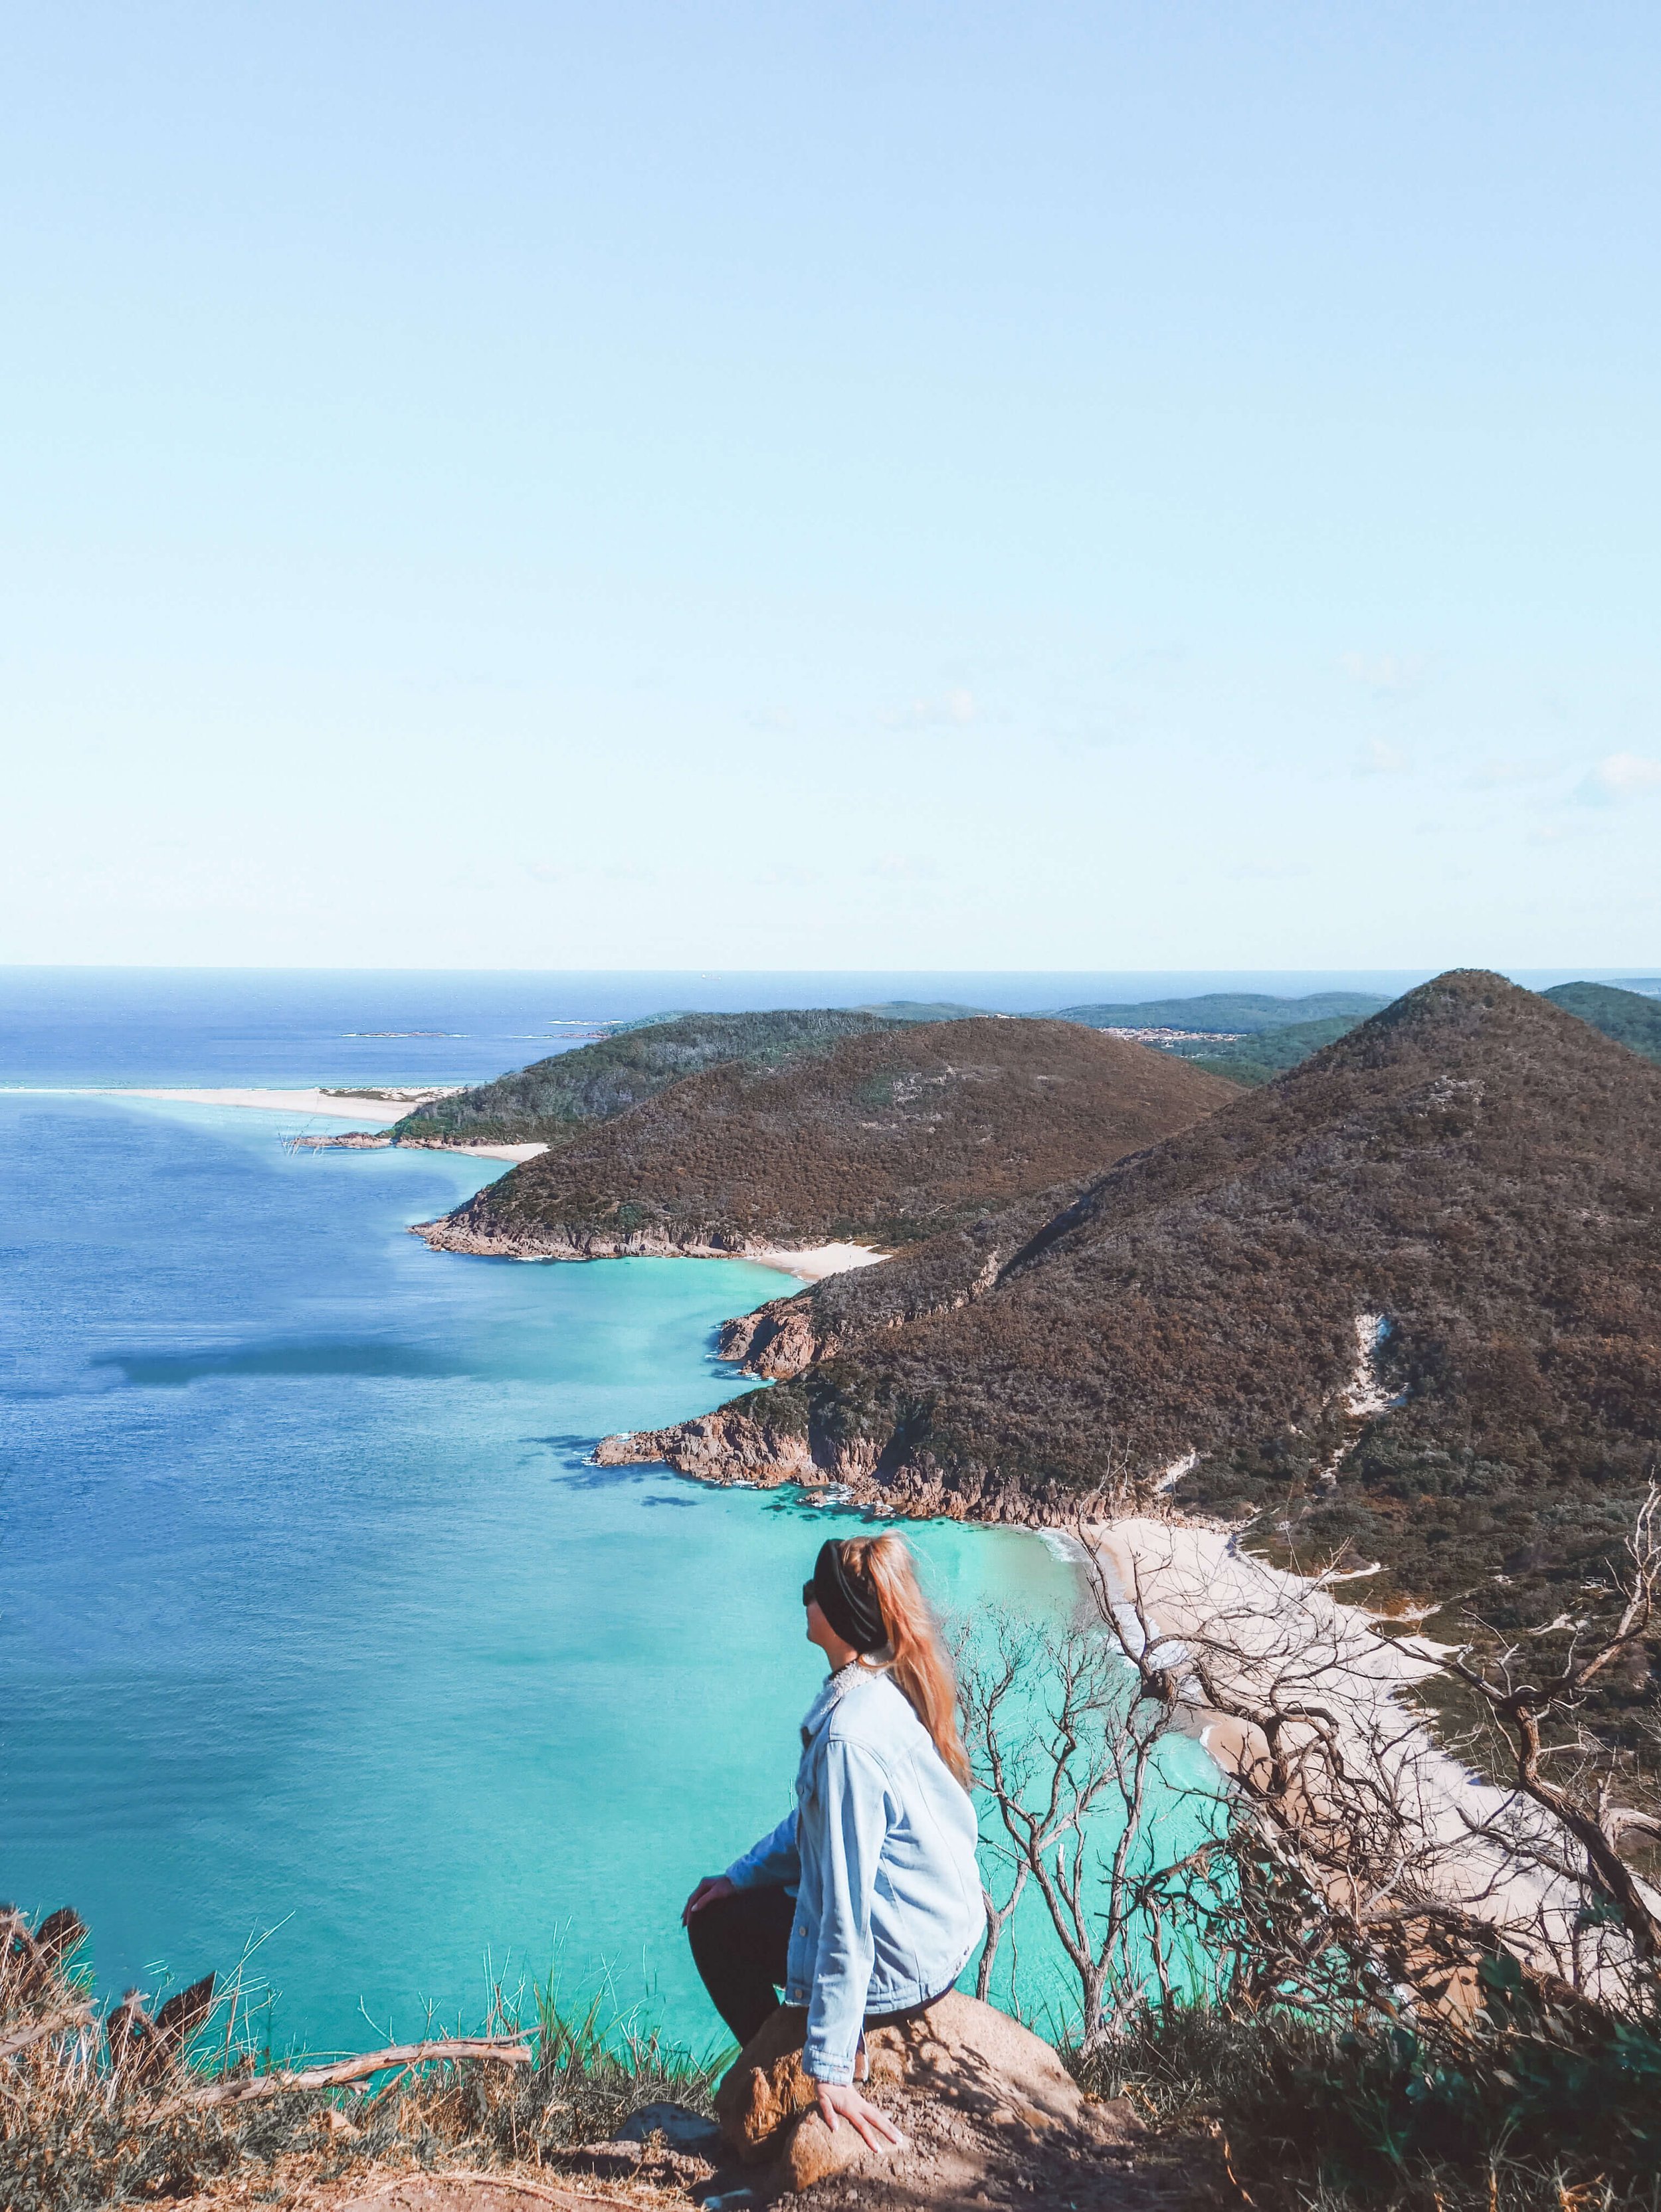 Contemplating the beautiful view on top of Tomaree Head - Port Stephens - New South Wales (NSW) - Australia